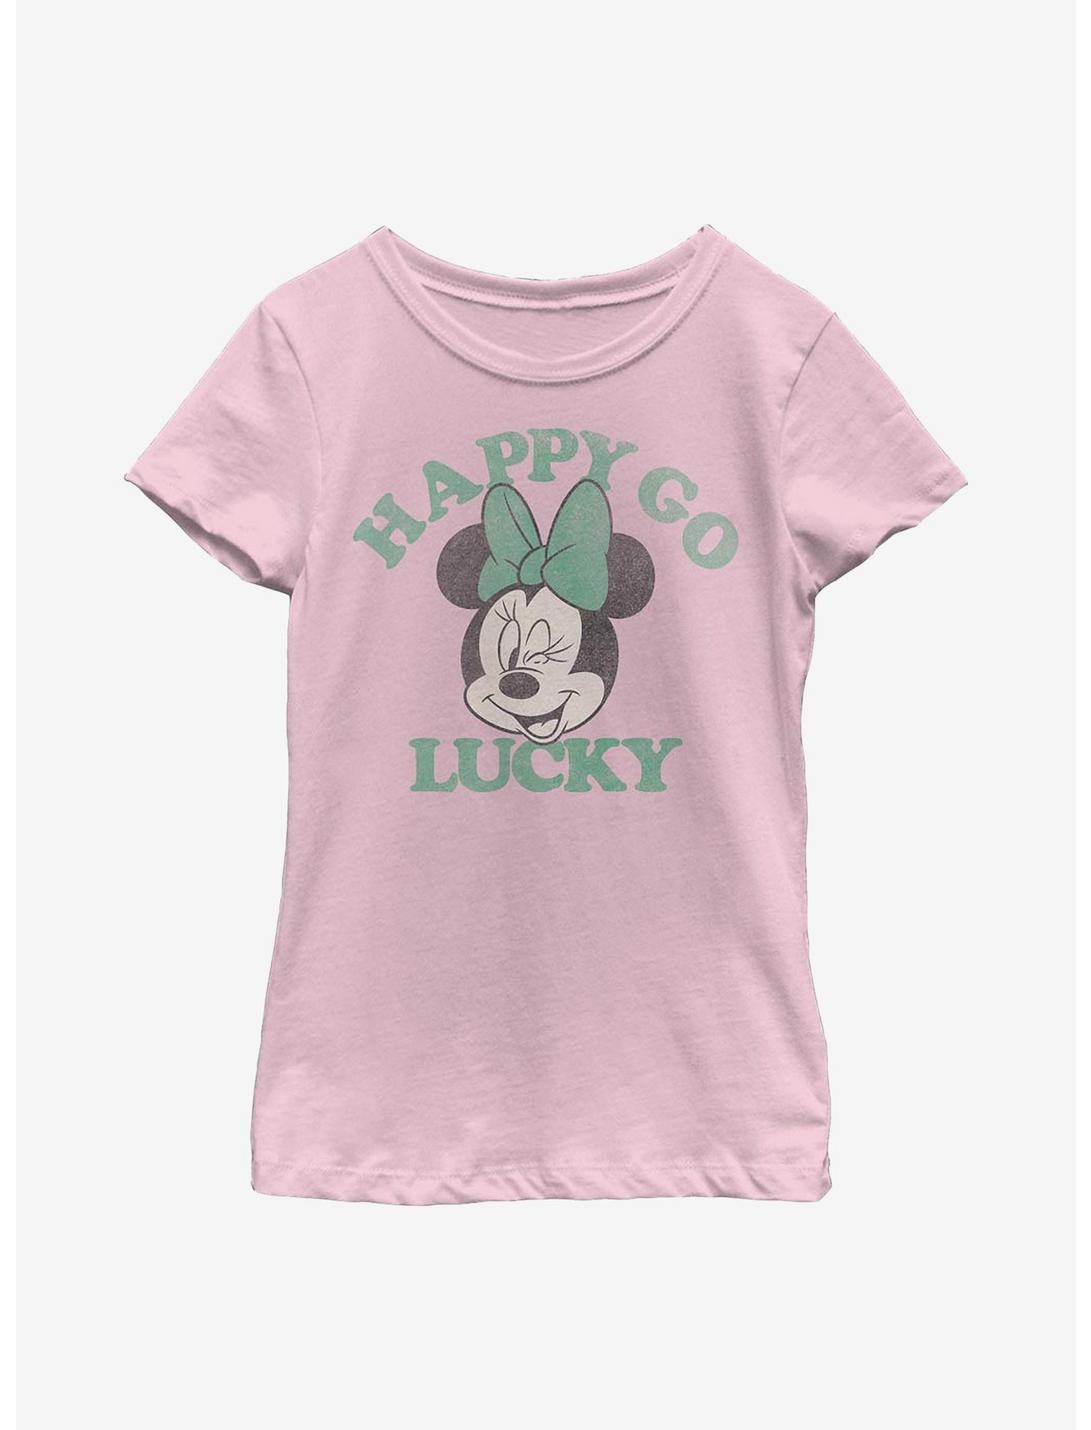 Disney Minnie Mouse Lucky Minnie Youth Girls T-Shirt, PINK, hi-res